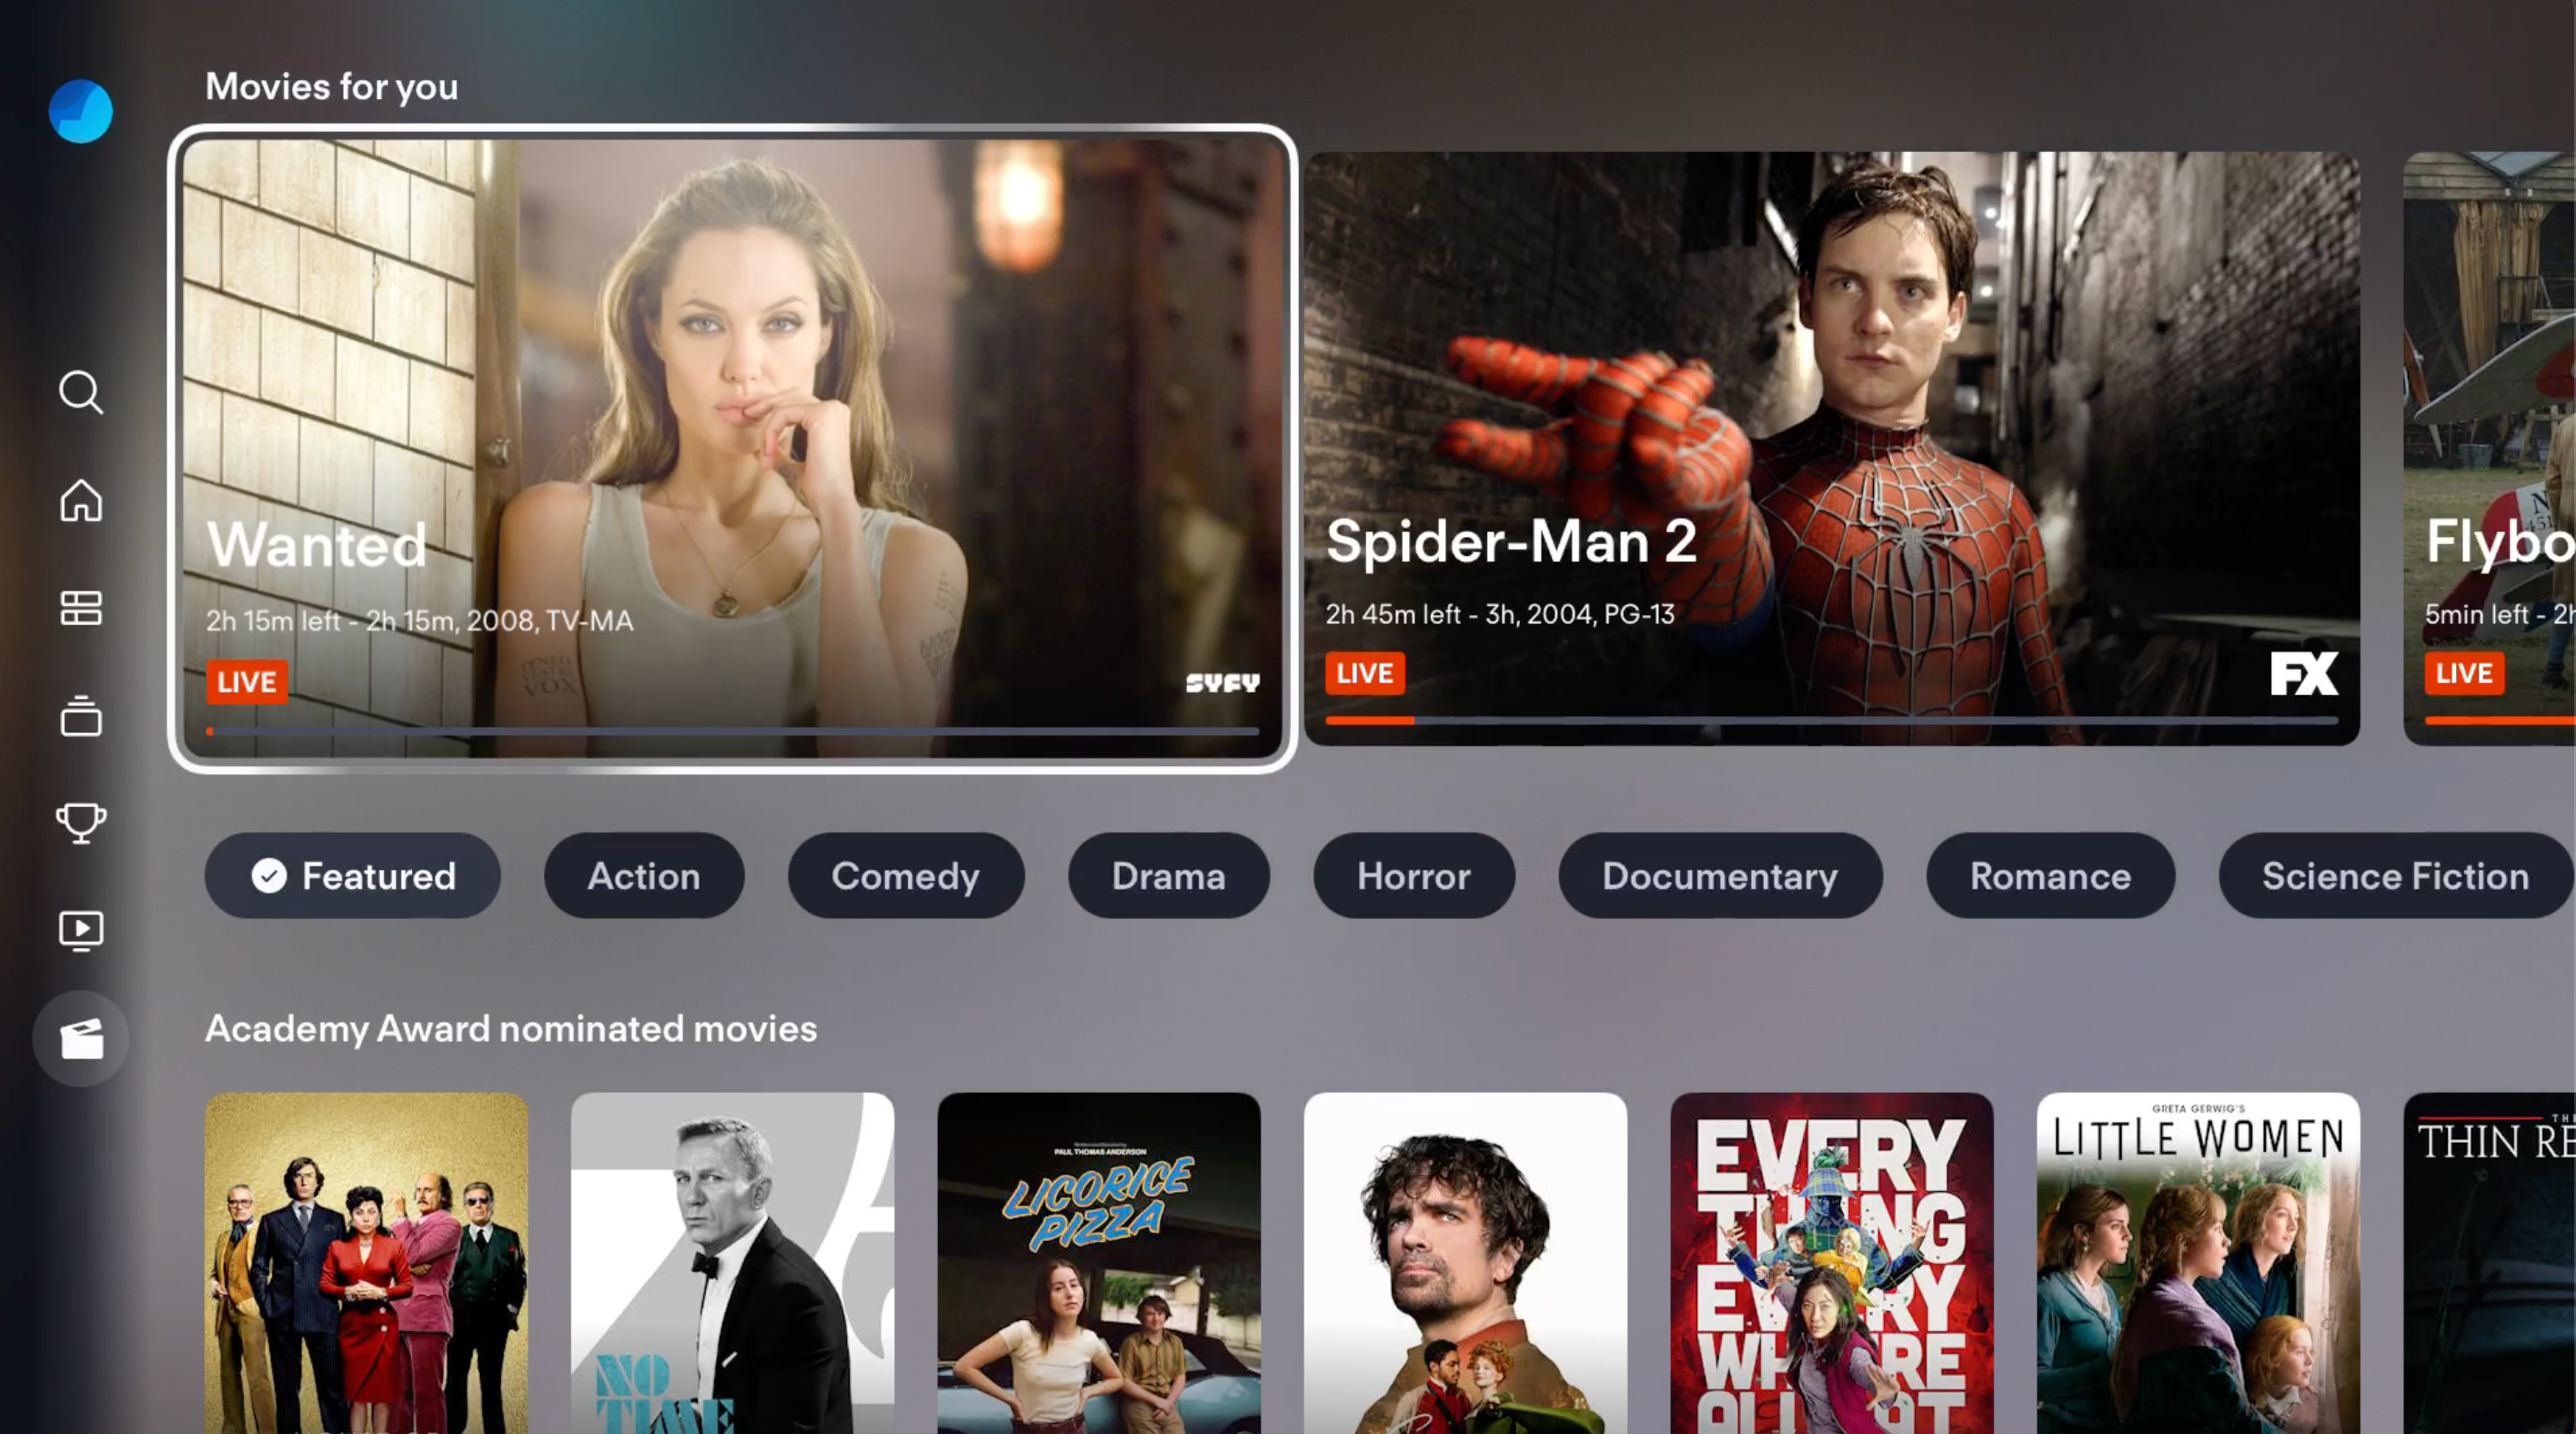 MOVIES screen of the FuboTV app on Apple TV with RECOMMENDED MOVIES highlighted